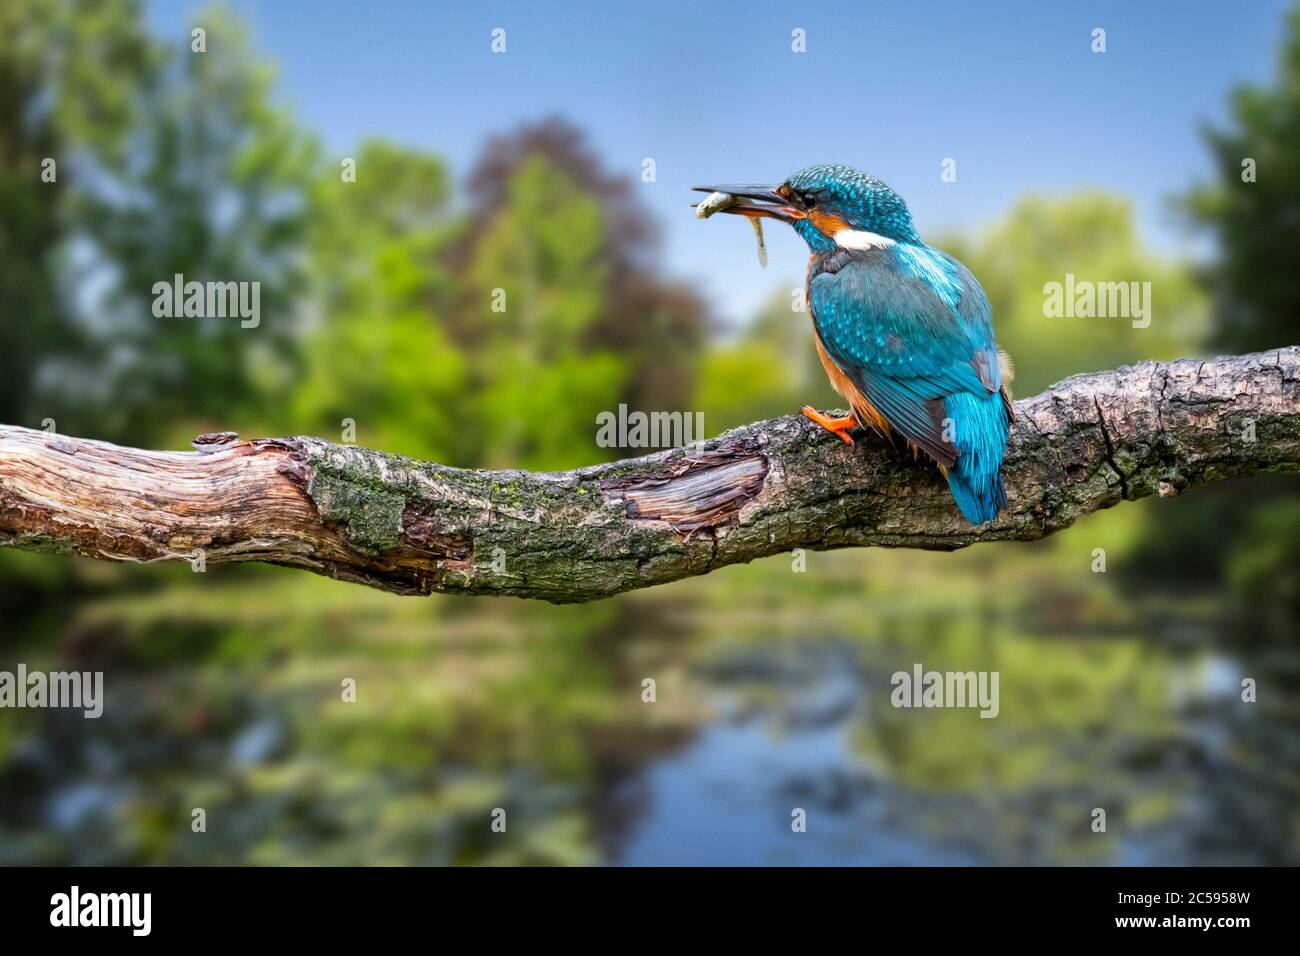 Common kingfisher (Alcedo atthis) female with caught ninespine stickleback (Pungitius pungitius) fish in beak perched on branch over water of pond Stock Photo